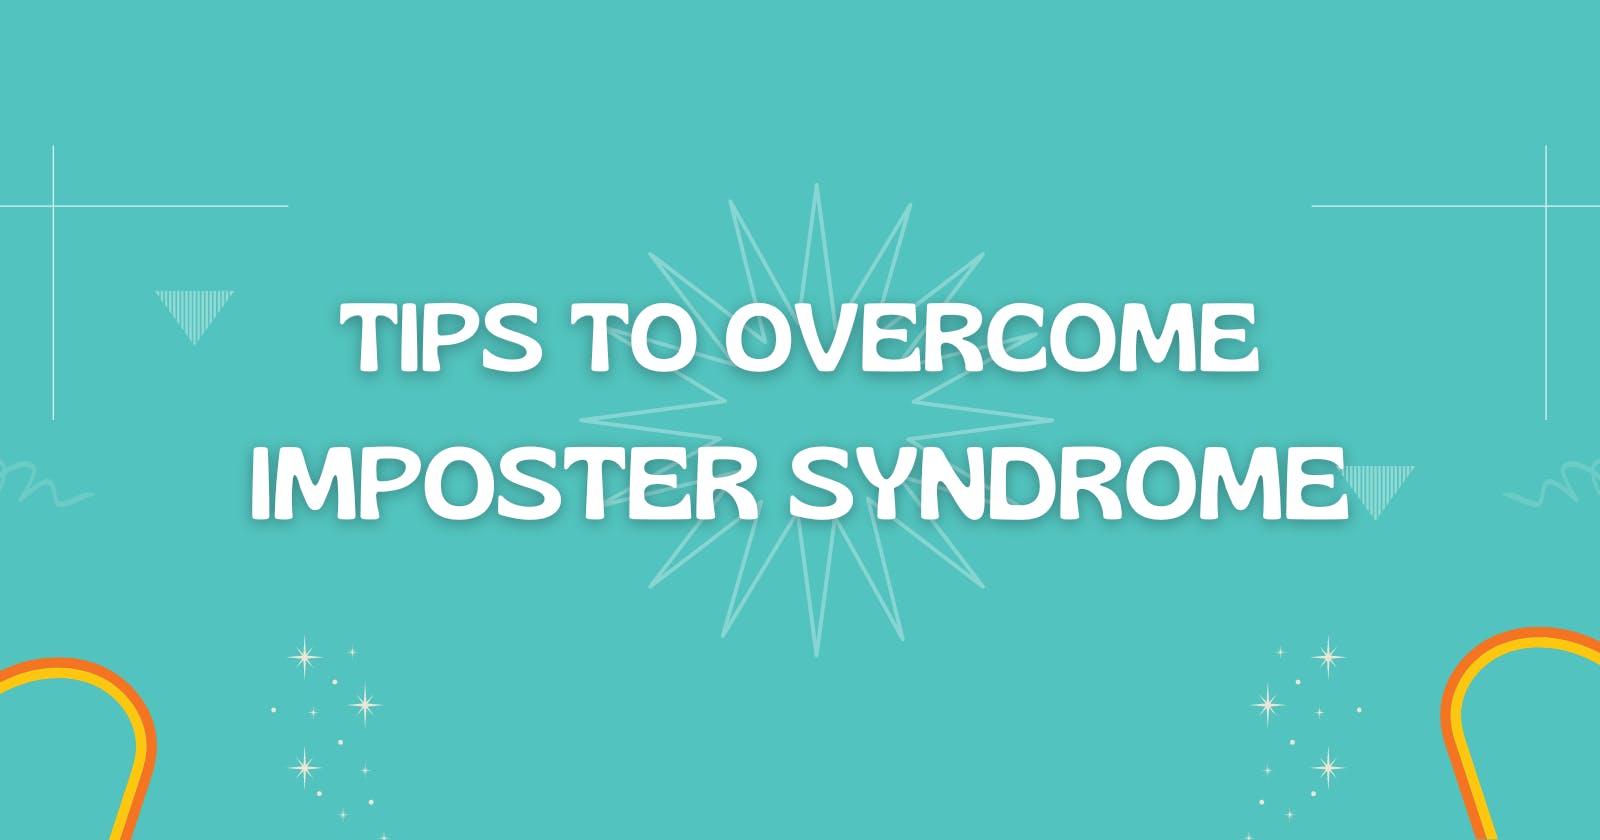 Tips to overcome Imposter Syndrome